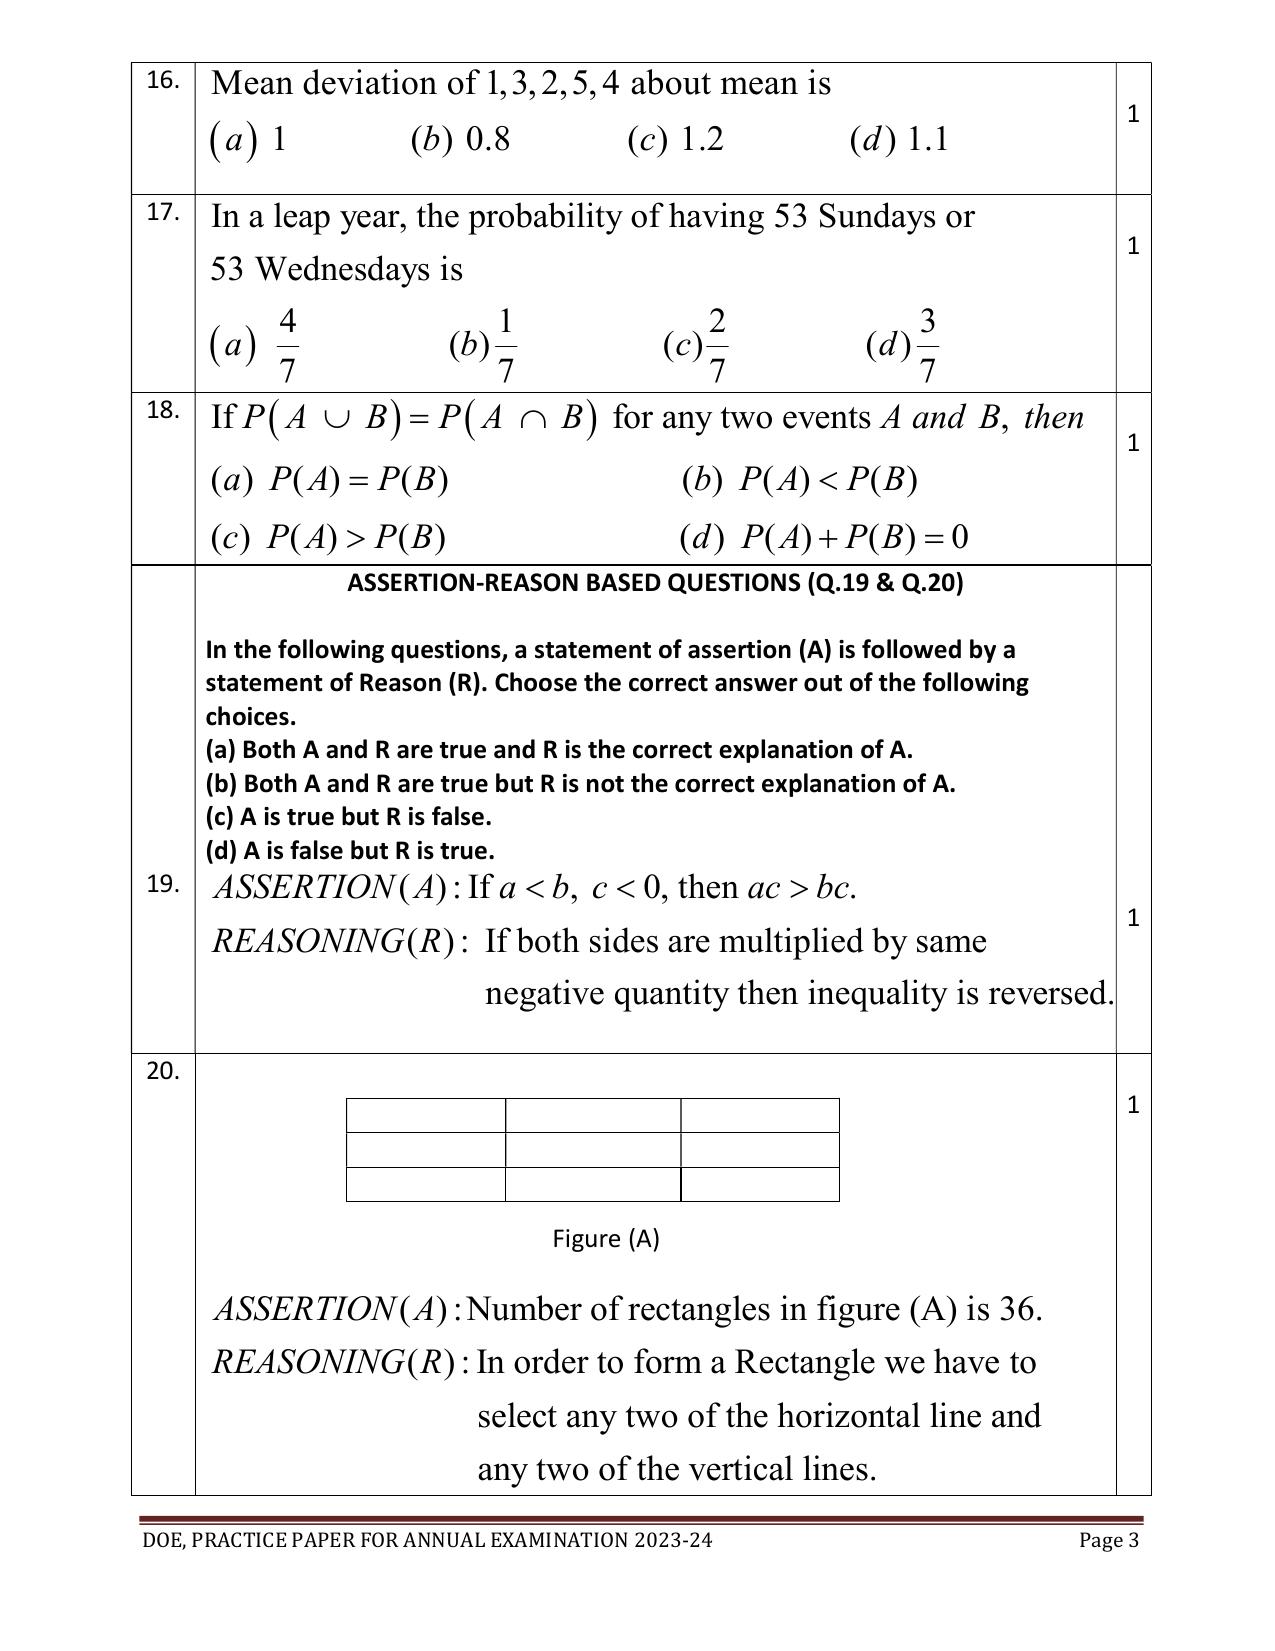 Edudel Class 11 Math (English) Practice Papers-2 (2023-24) - Page 3